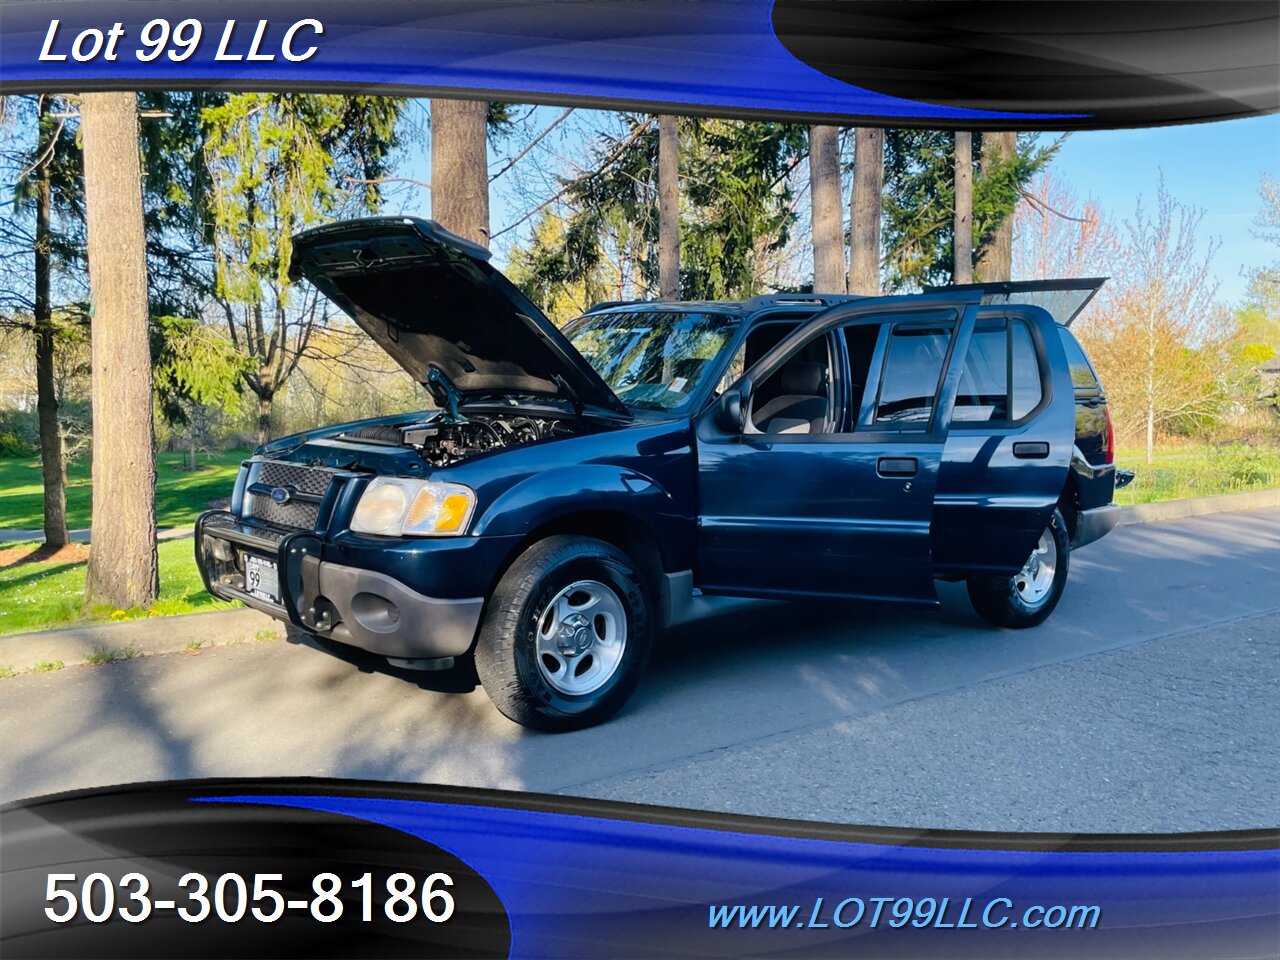 2003 Ford Explorer Sport Trac XLS 4x4  1-OWNER 117k  NEW TIRES  Canopy   - Photo 41 - Milwaukie, OR 97267